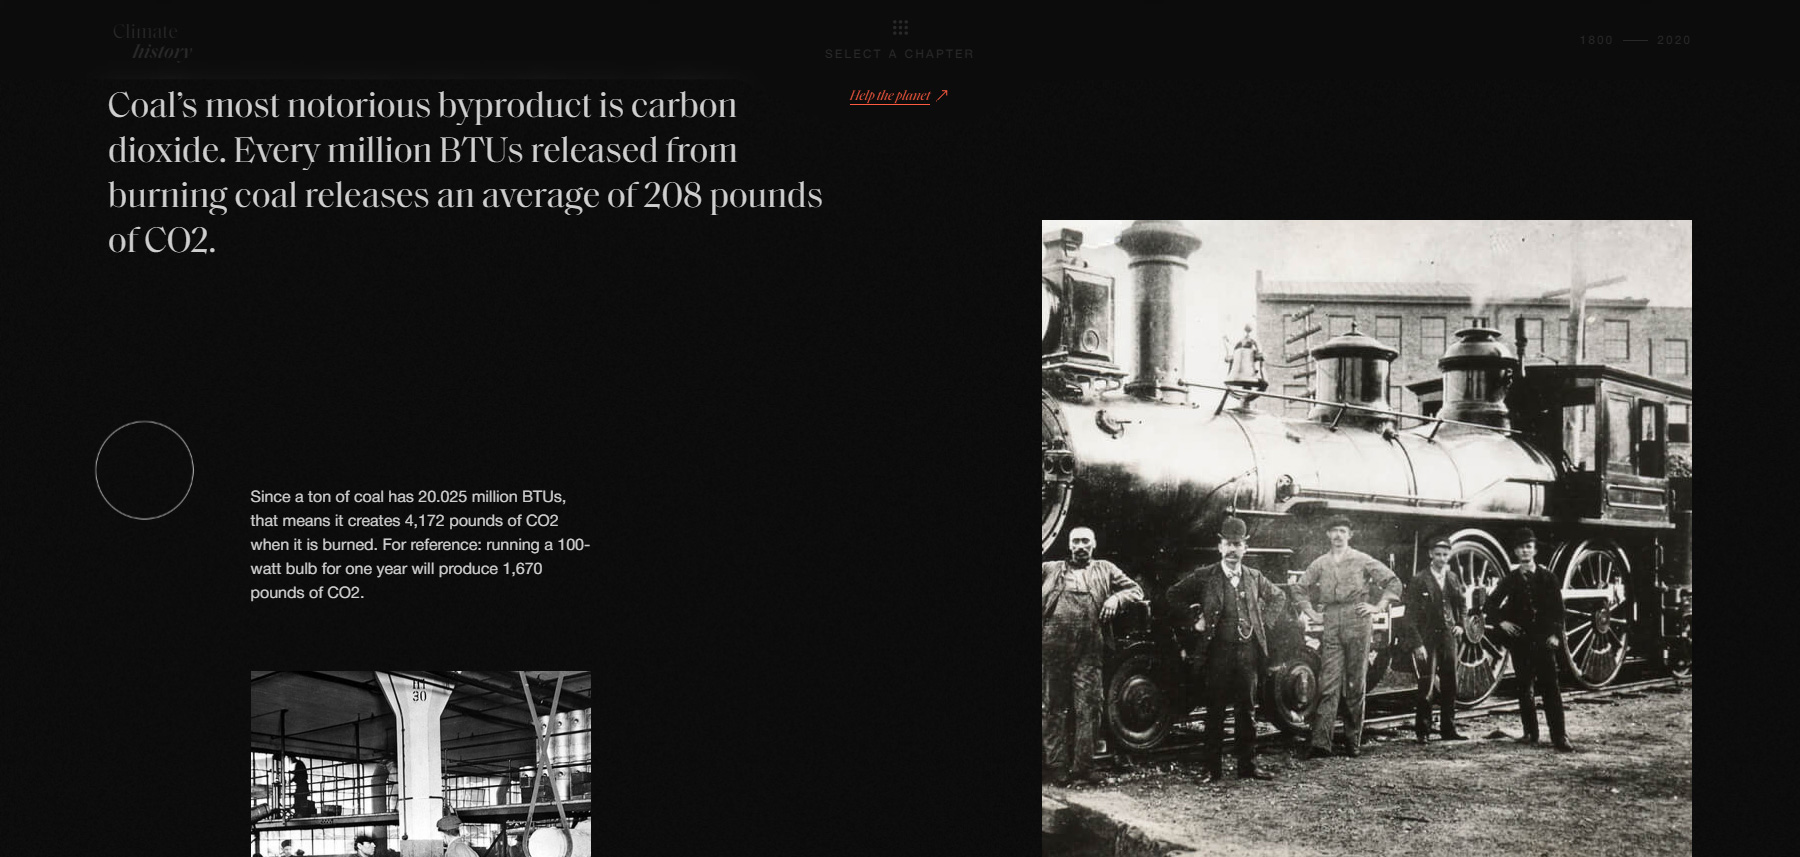 Climate History - Website of the Day